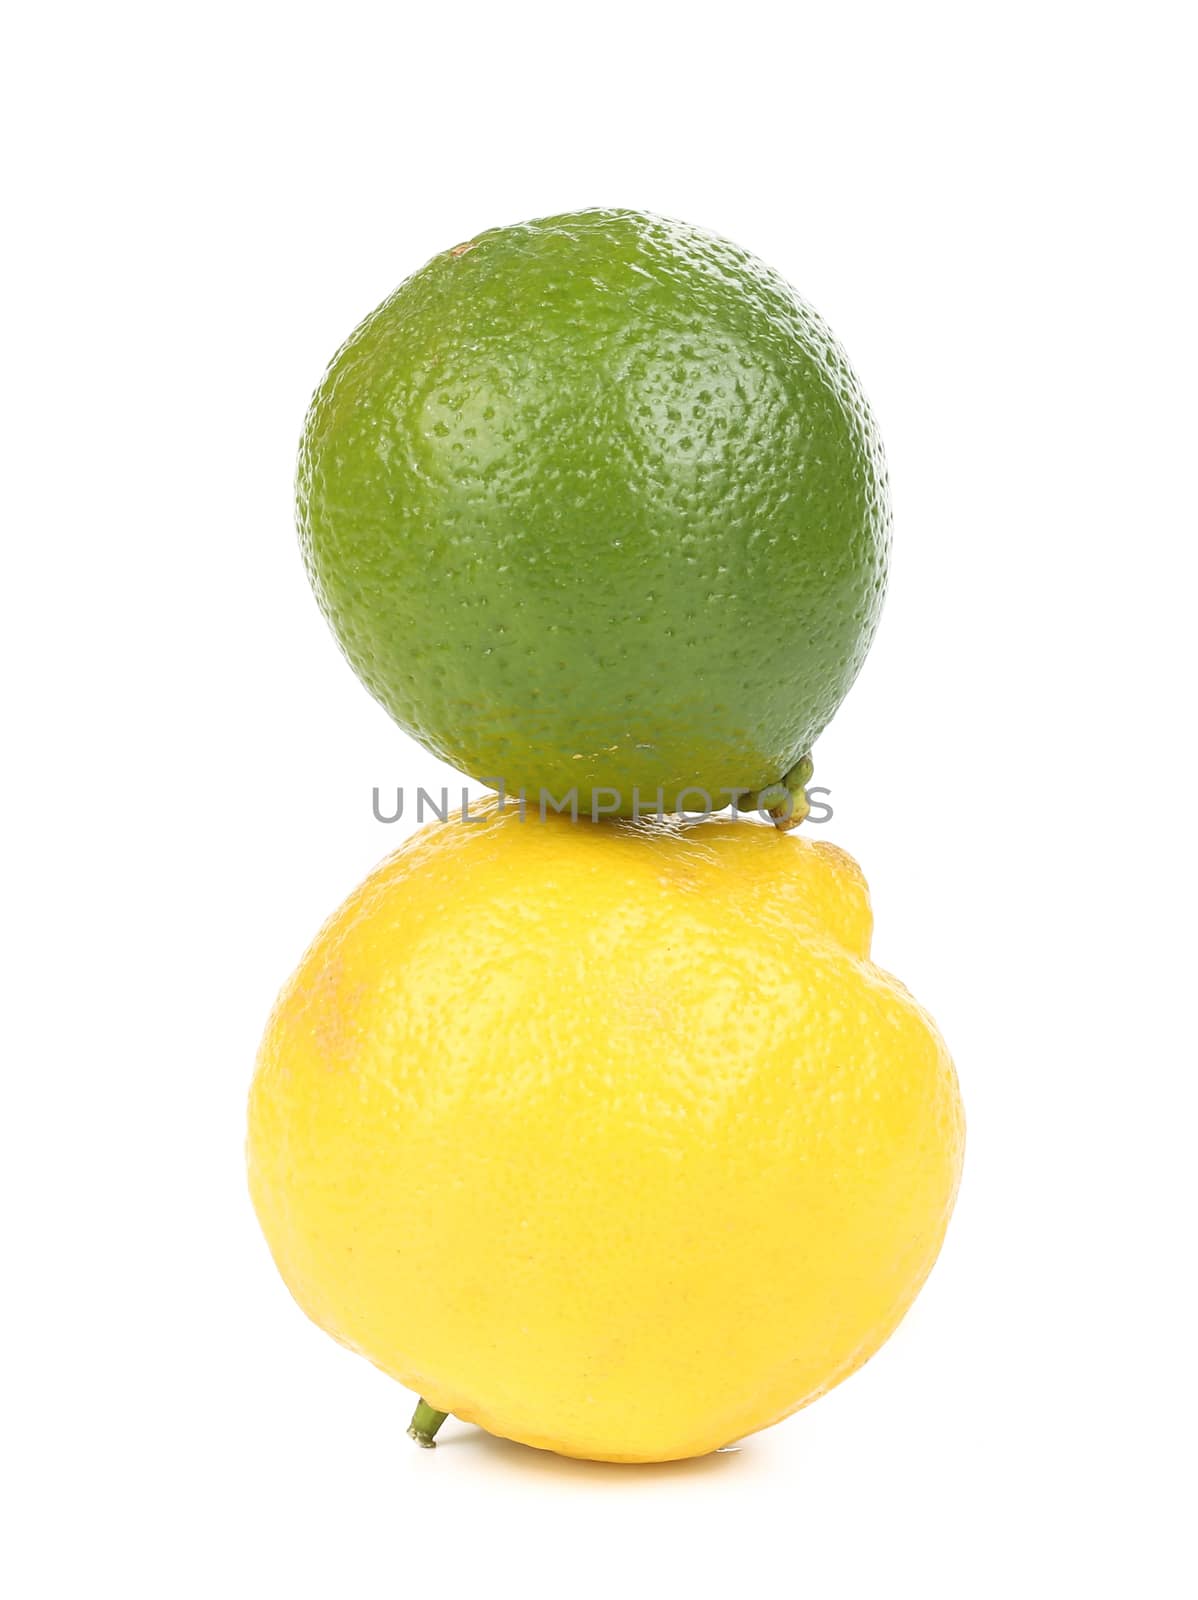 Fresh lime and lemon. Isolated on a white background.